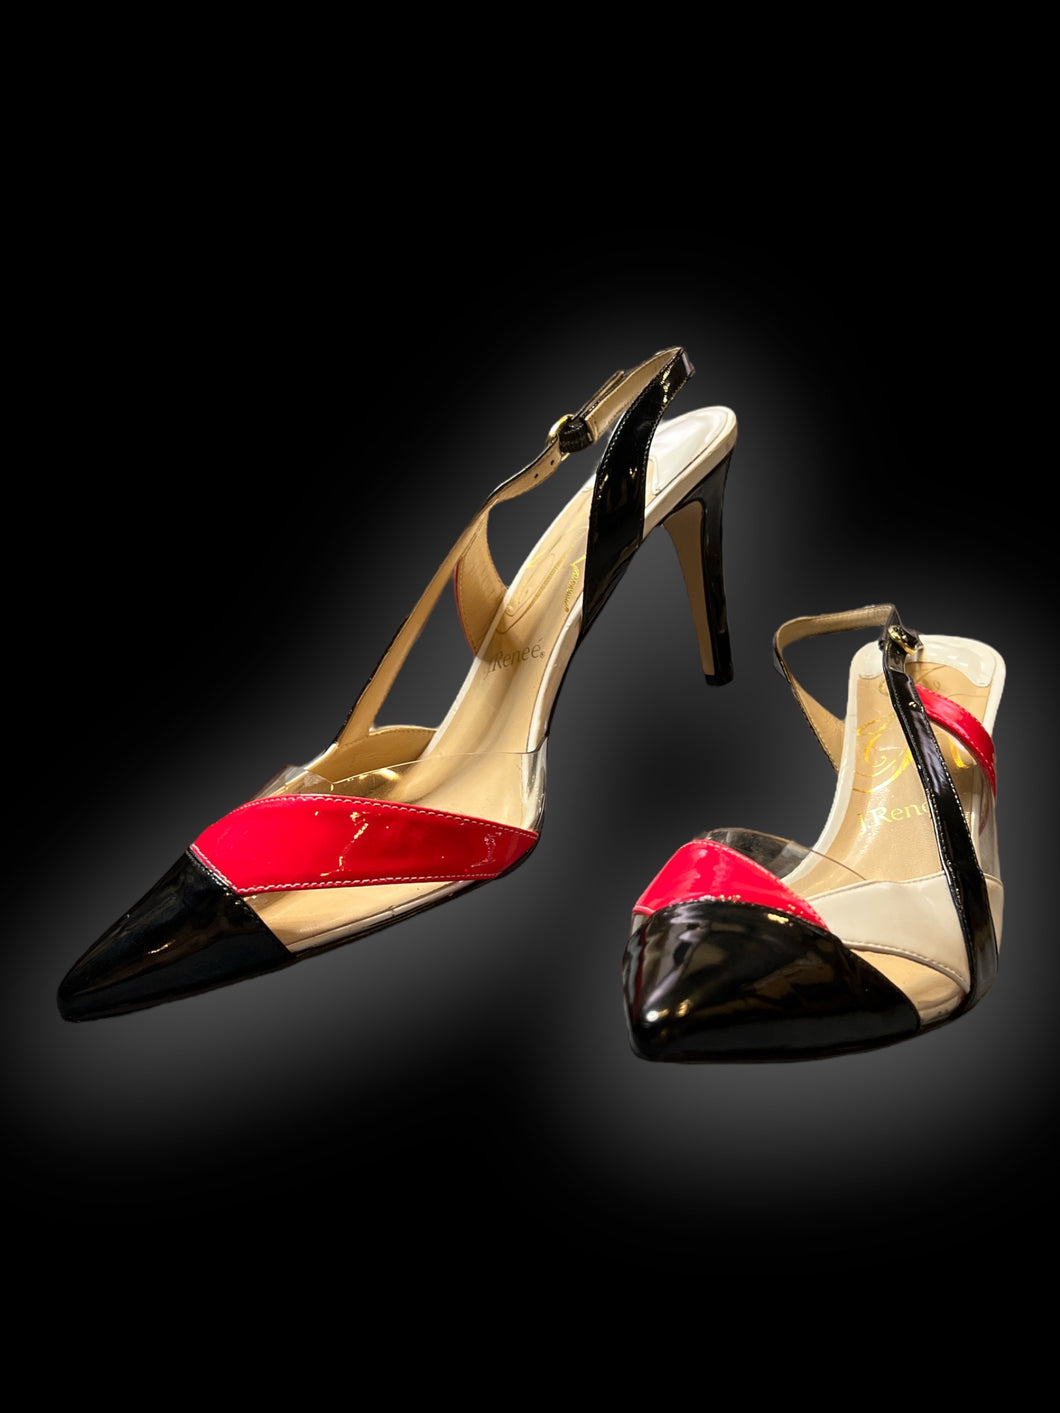 13W Red, white, & black stiletto shoes w/ clear details, adjustable strap ankles, & pointed toes